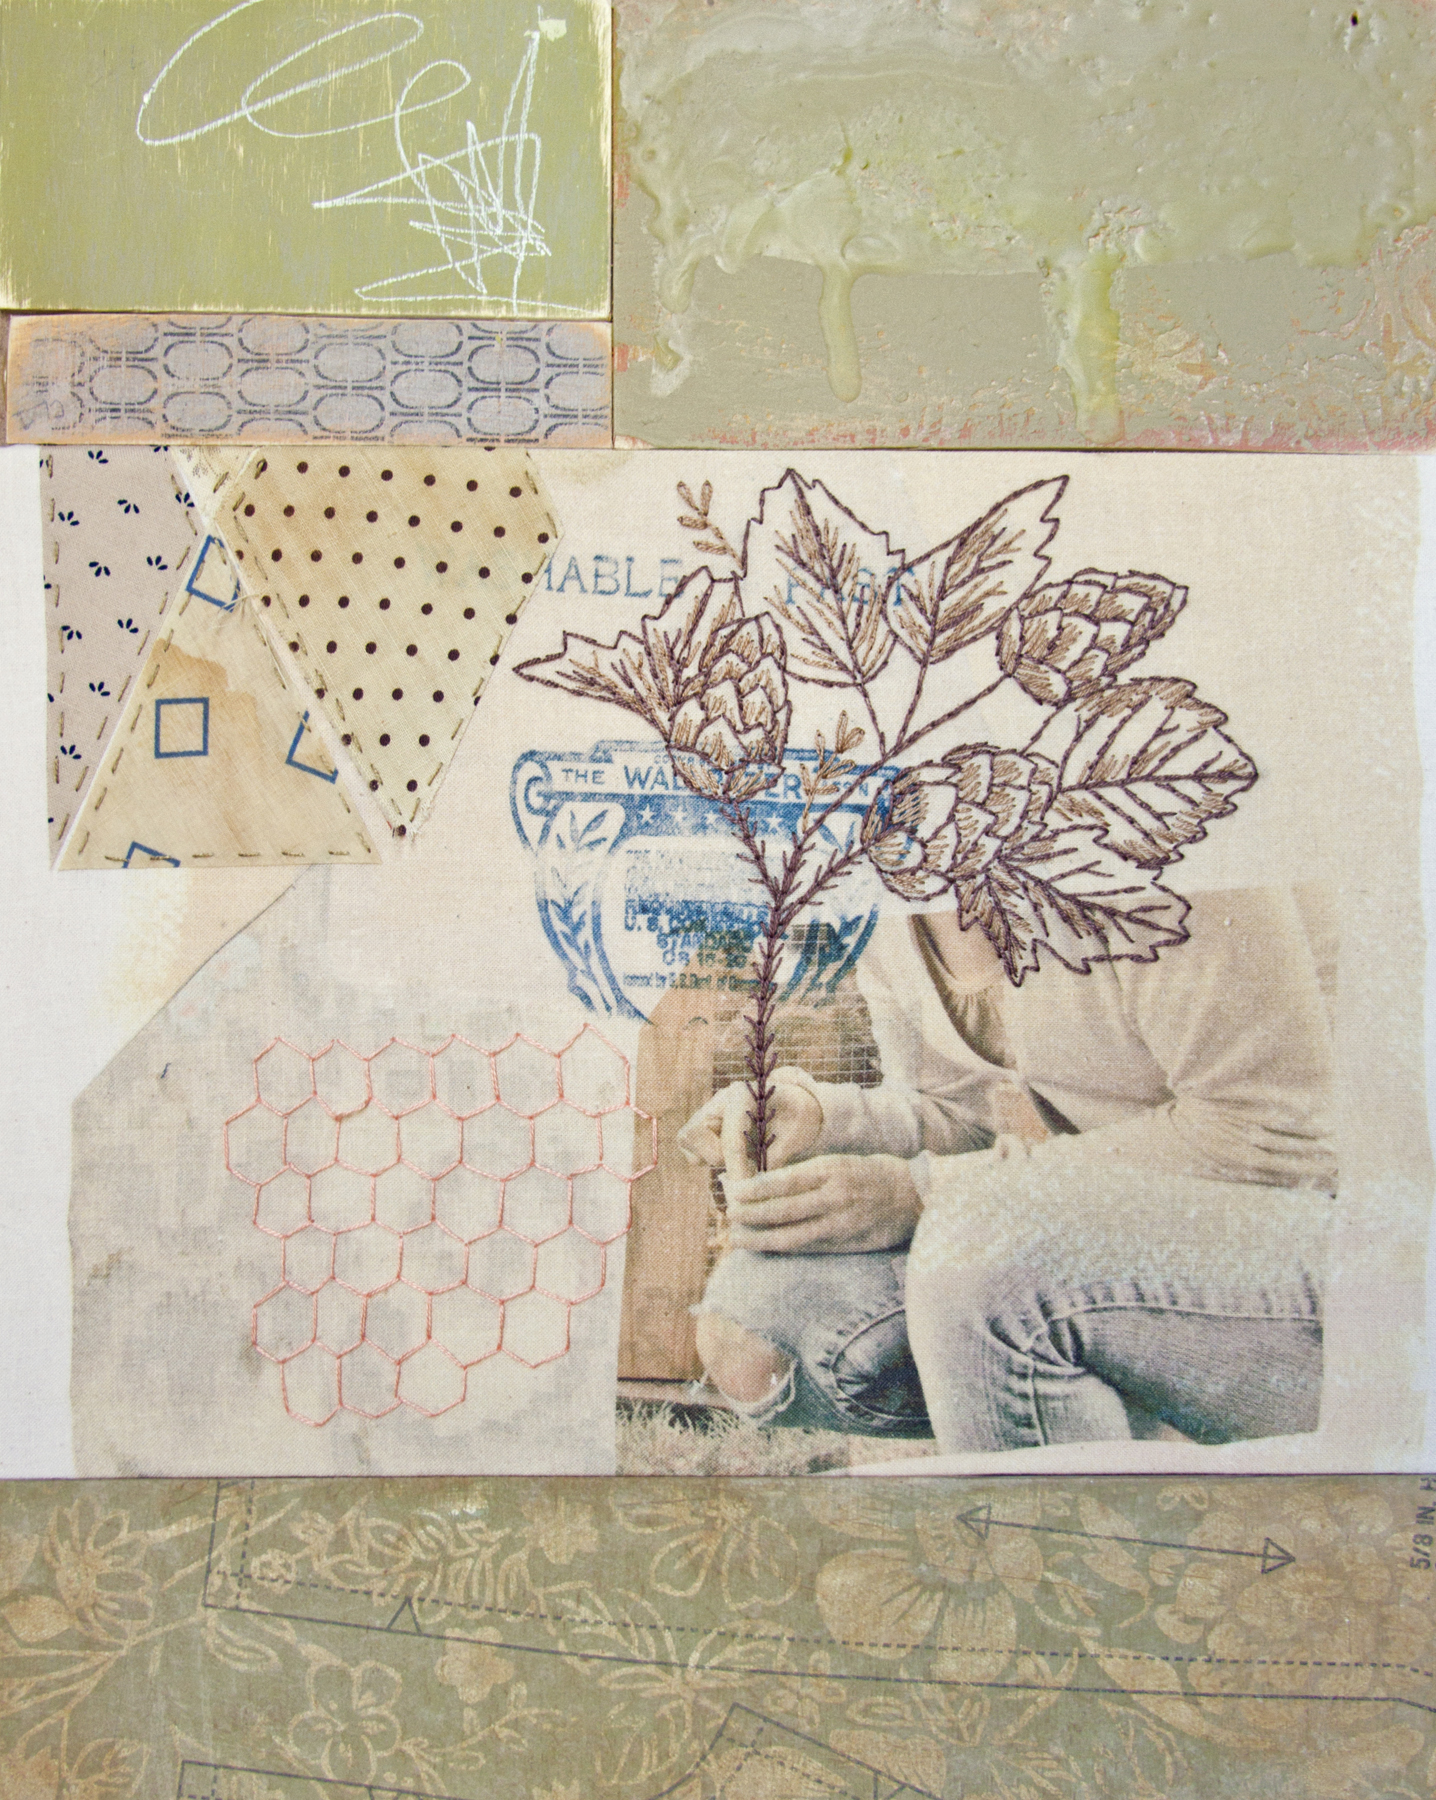  Chelsea Revelle,  Clifton: From Memory Series,  Assemblage, 13x15.5 